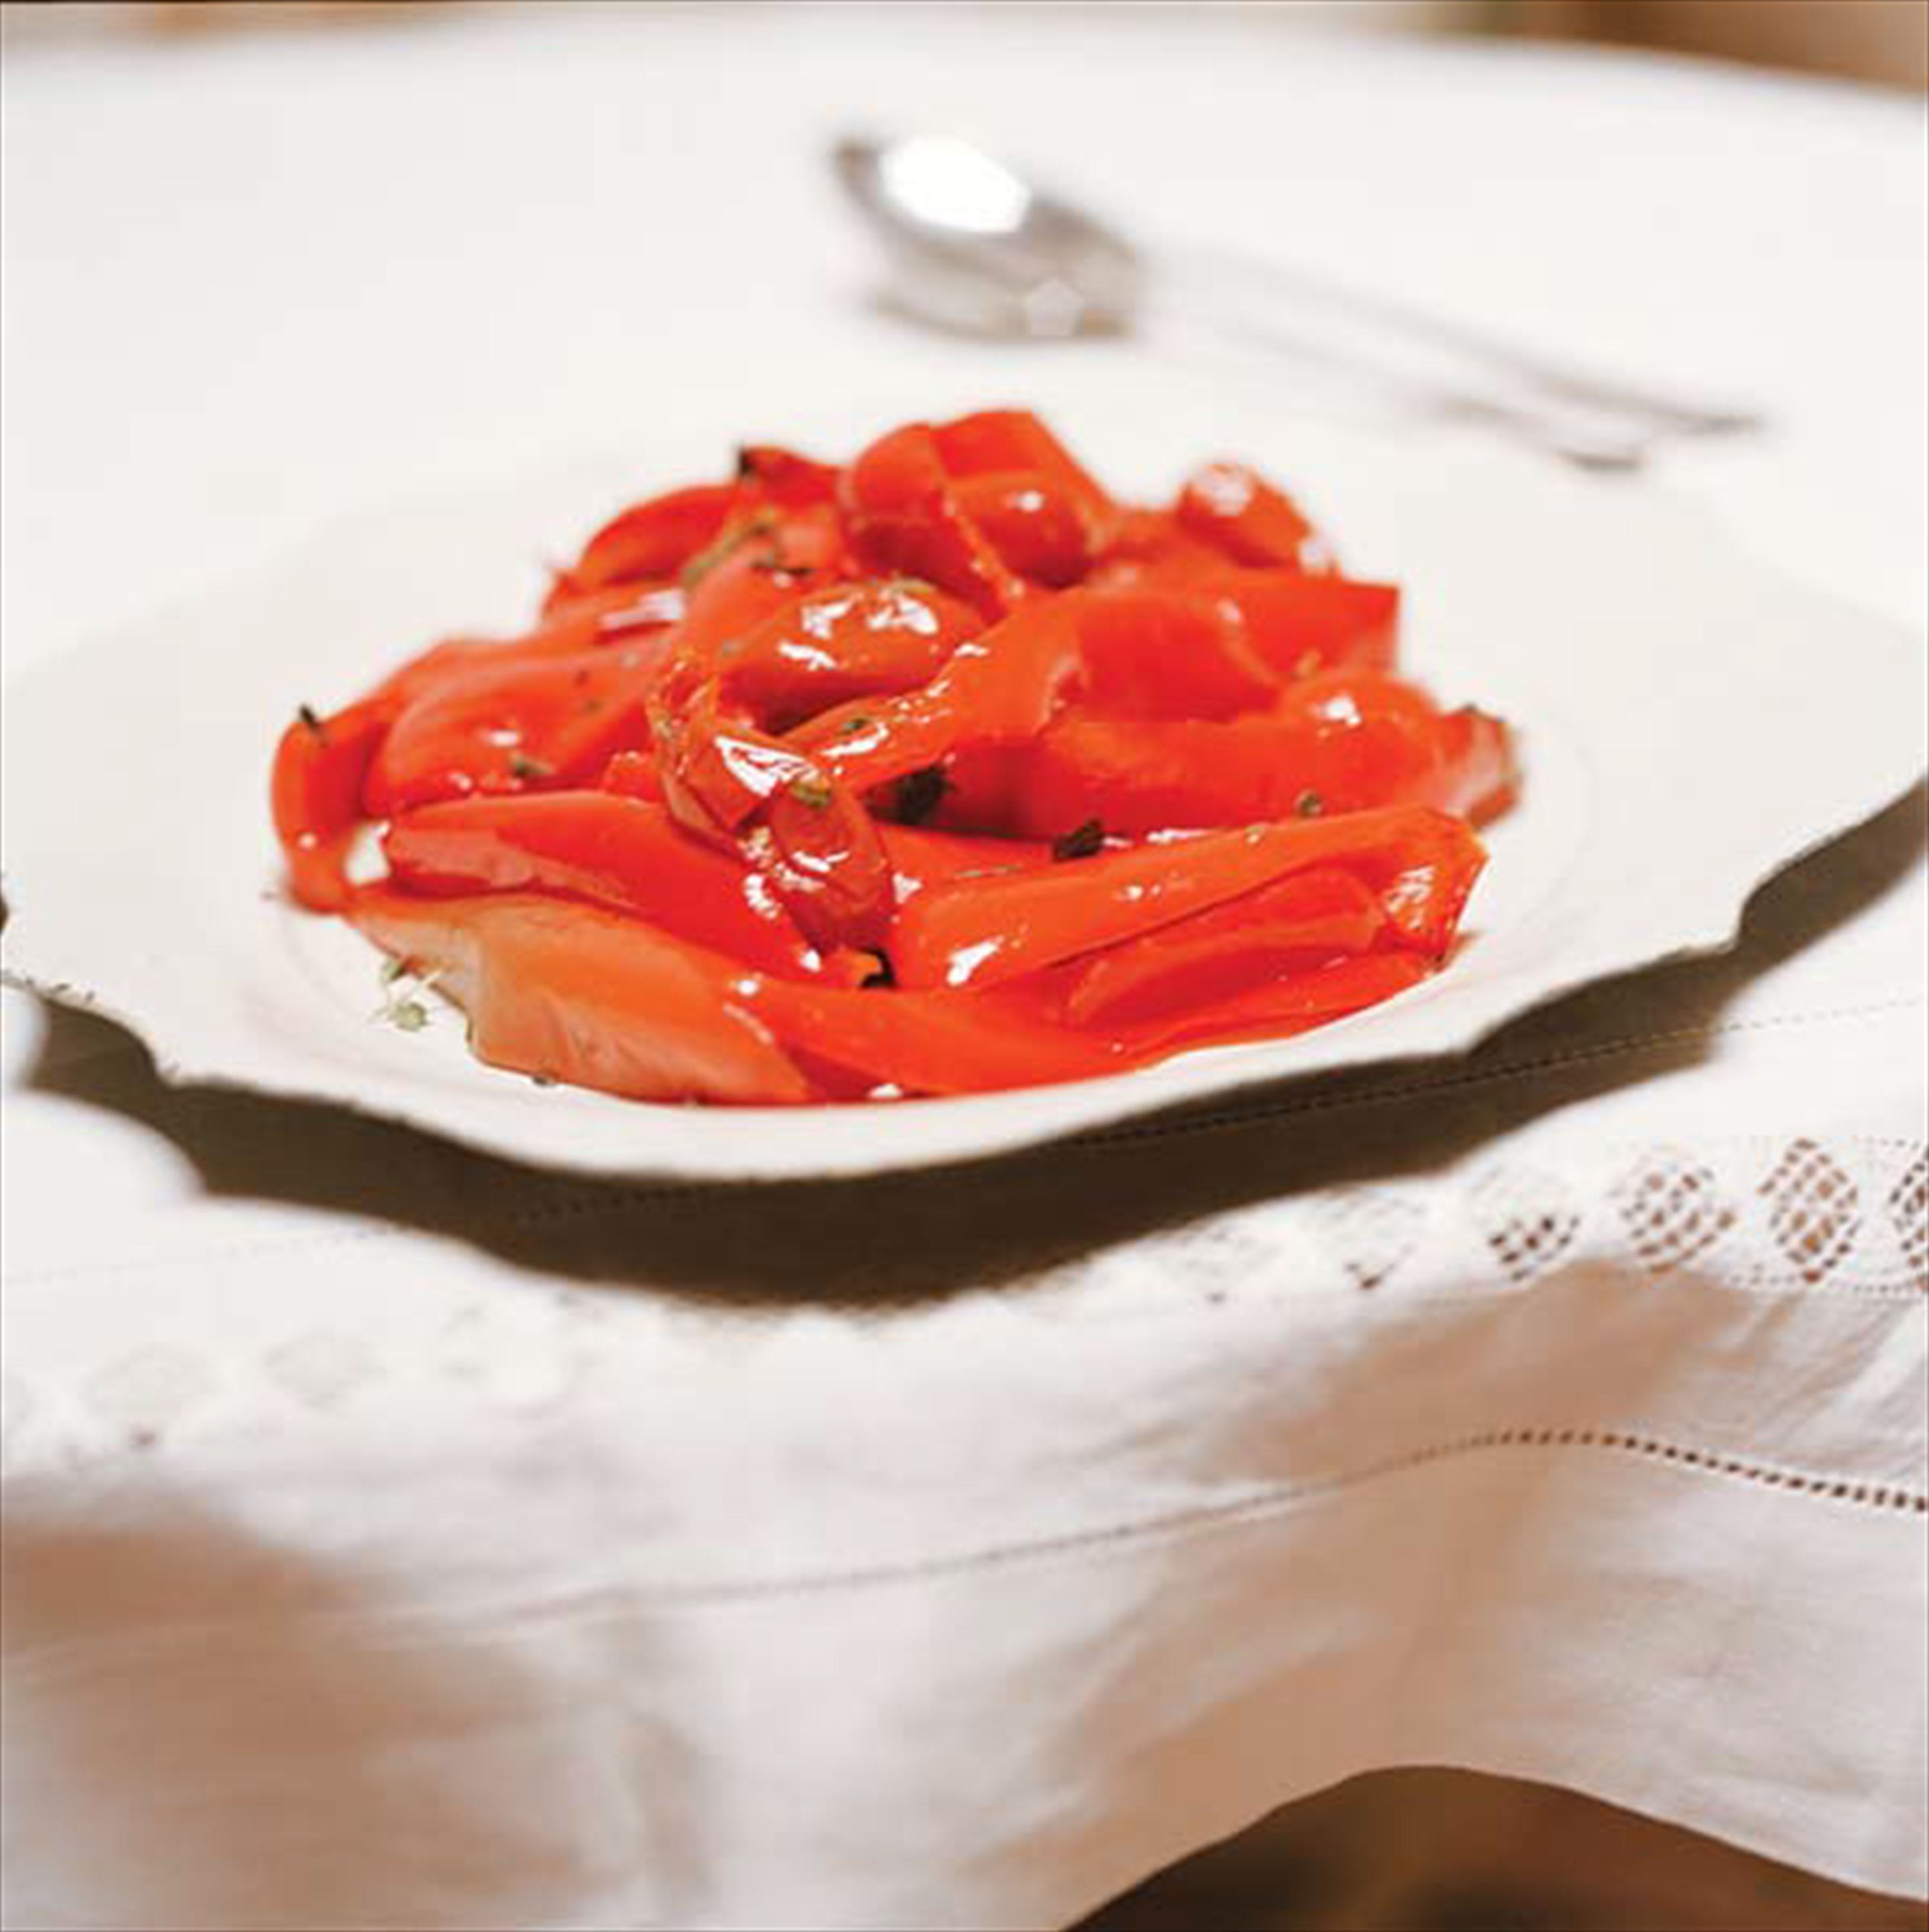 Roasted red peppers with tomatoes